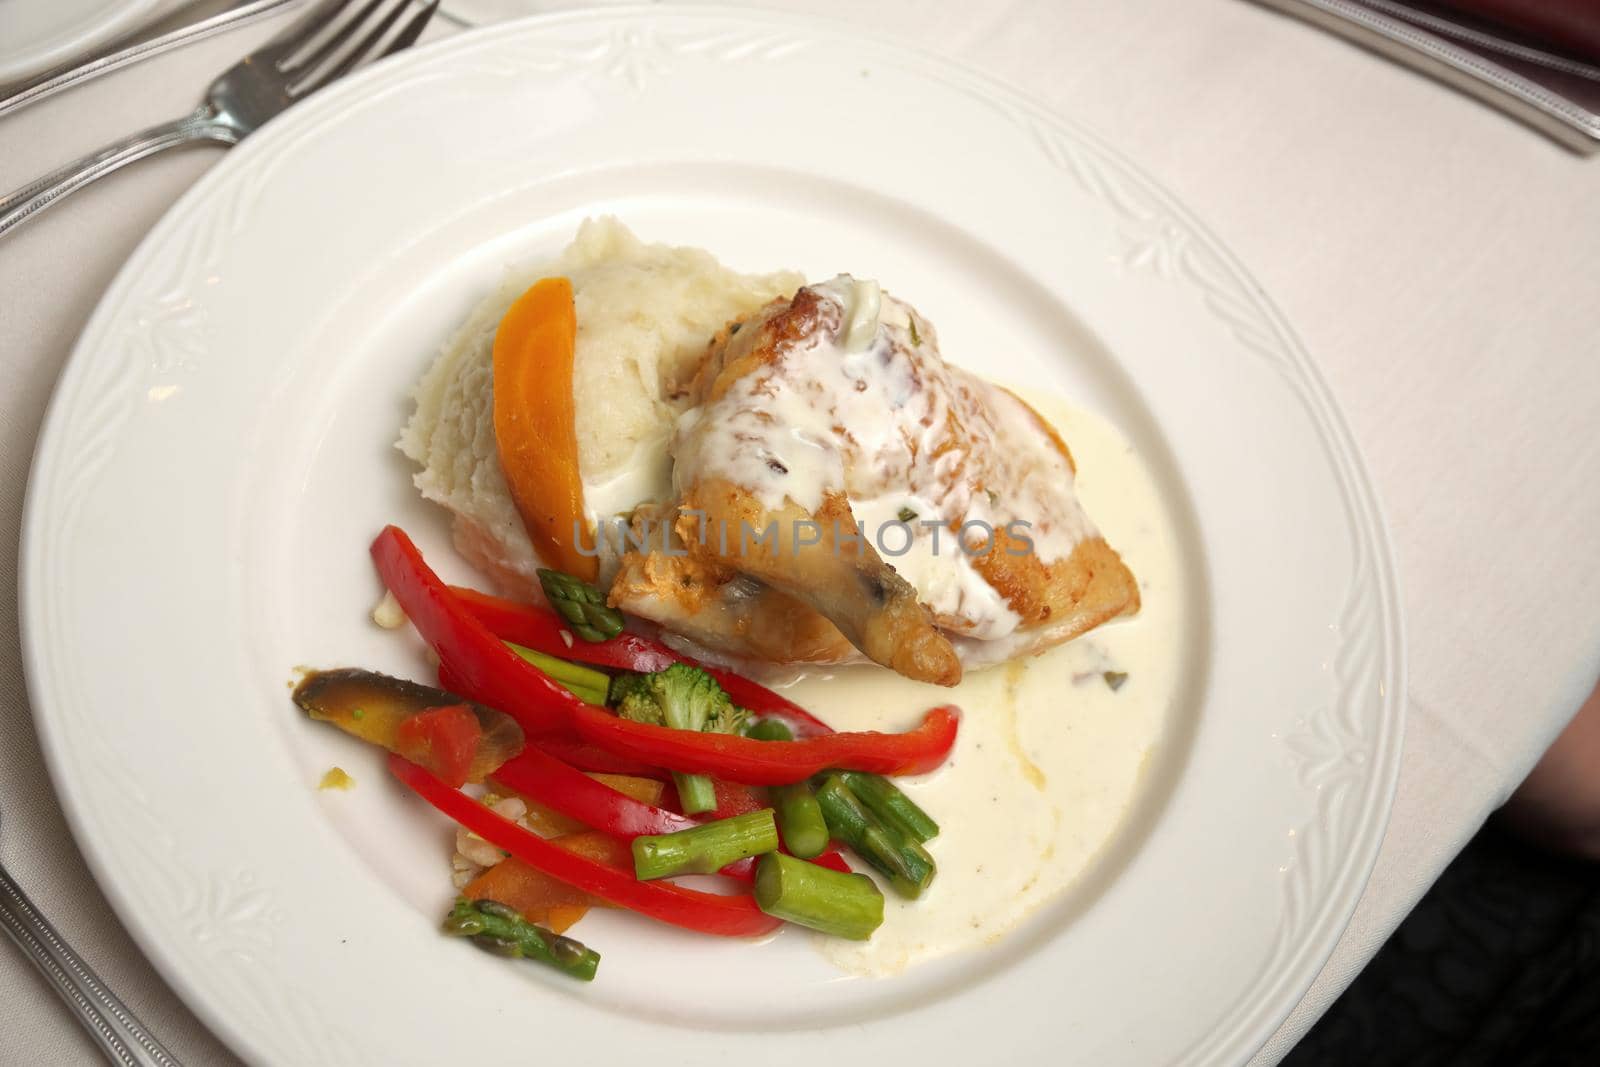 Roasted Wuarter Chicken with White Cream Sauce and Sauteed Seasonal Vegetables and Mashed Potatoes by markvandam